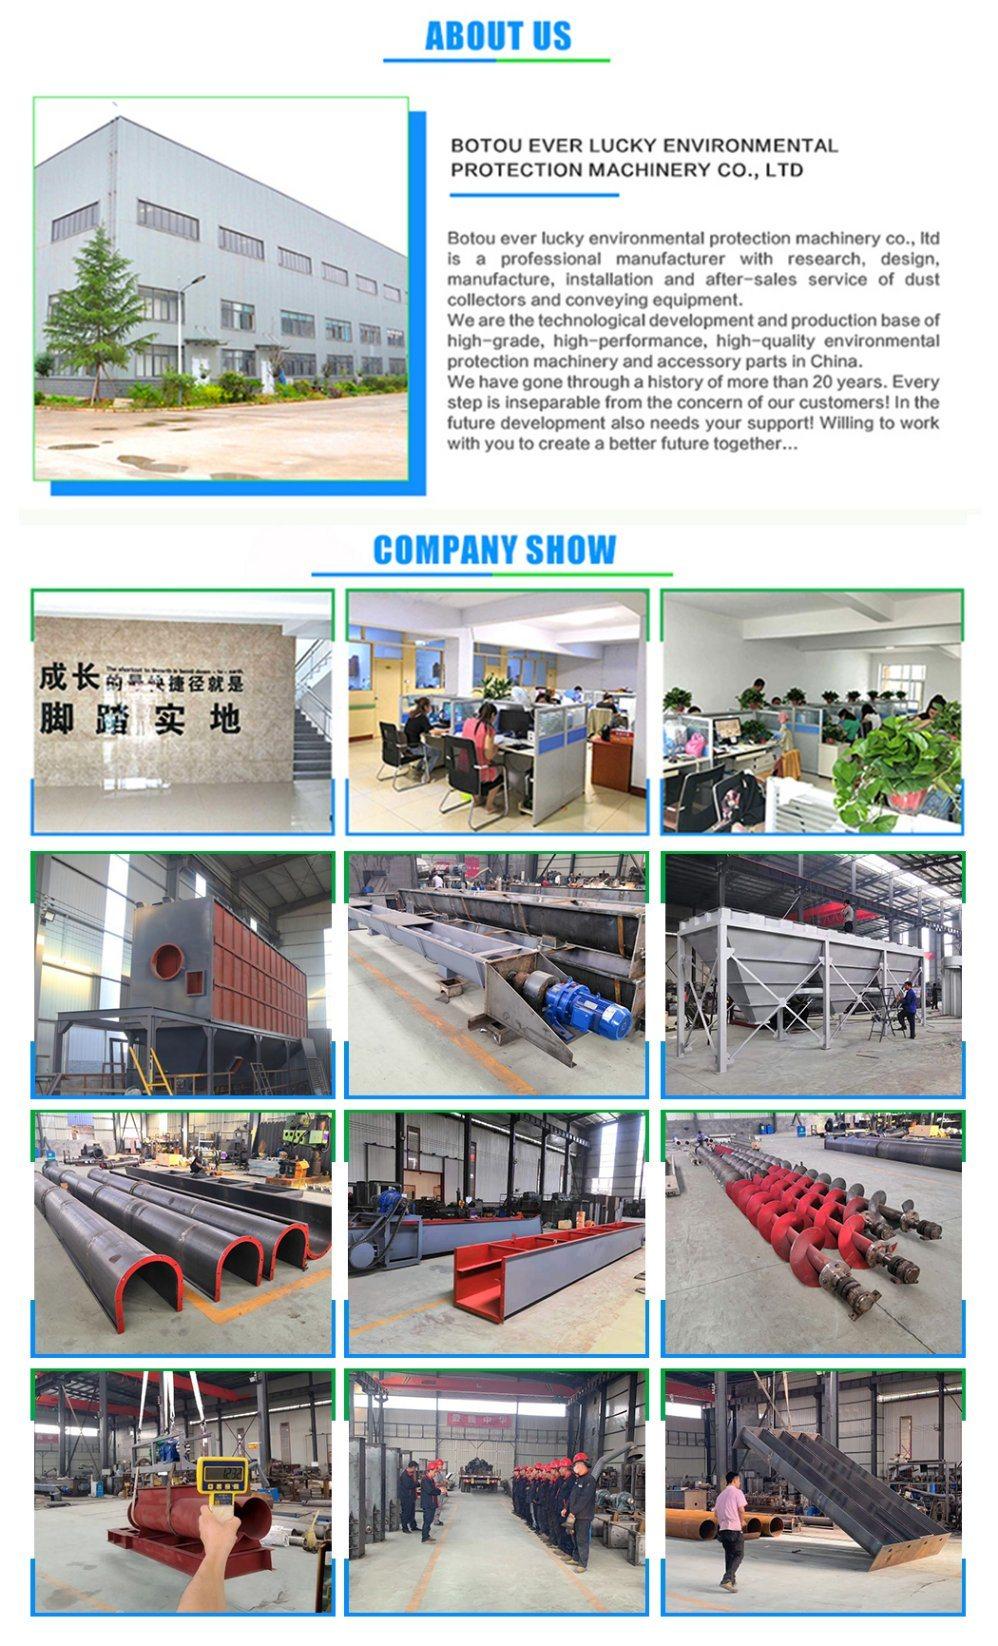 Widely Used Screw Conveyor Flexible for Transporting Wood Chips/Bulk Materials